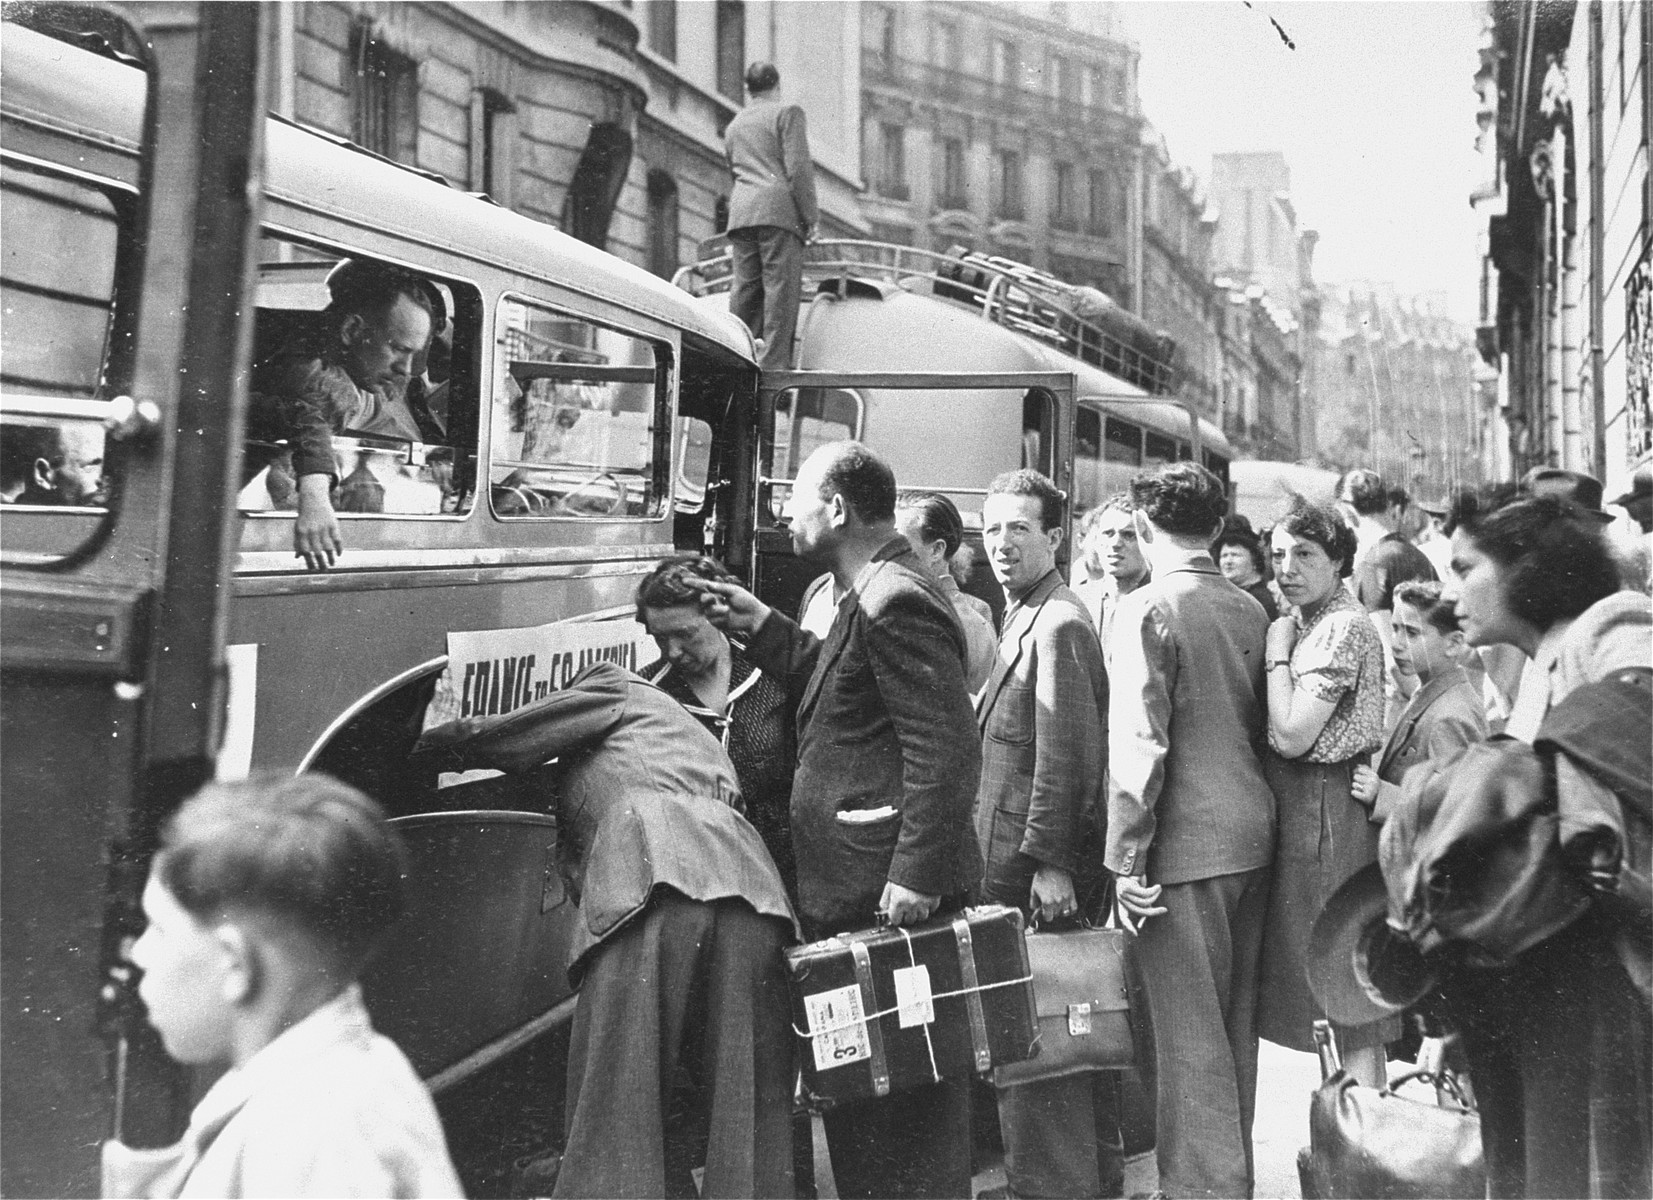 Jewish DPs wait in line on a street in Paris to board a convoy of buses that will transport them to Marseilles, on the first leg of their journey to new homes in South America and Australia.